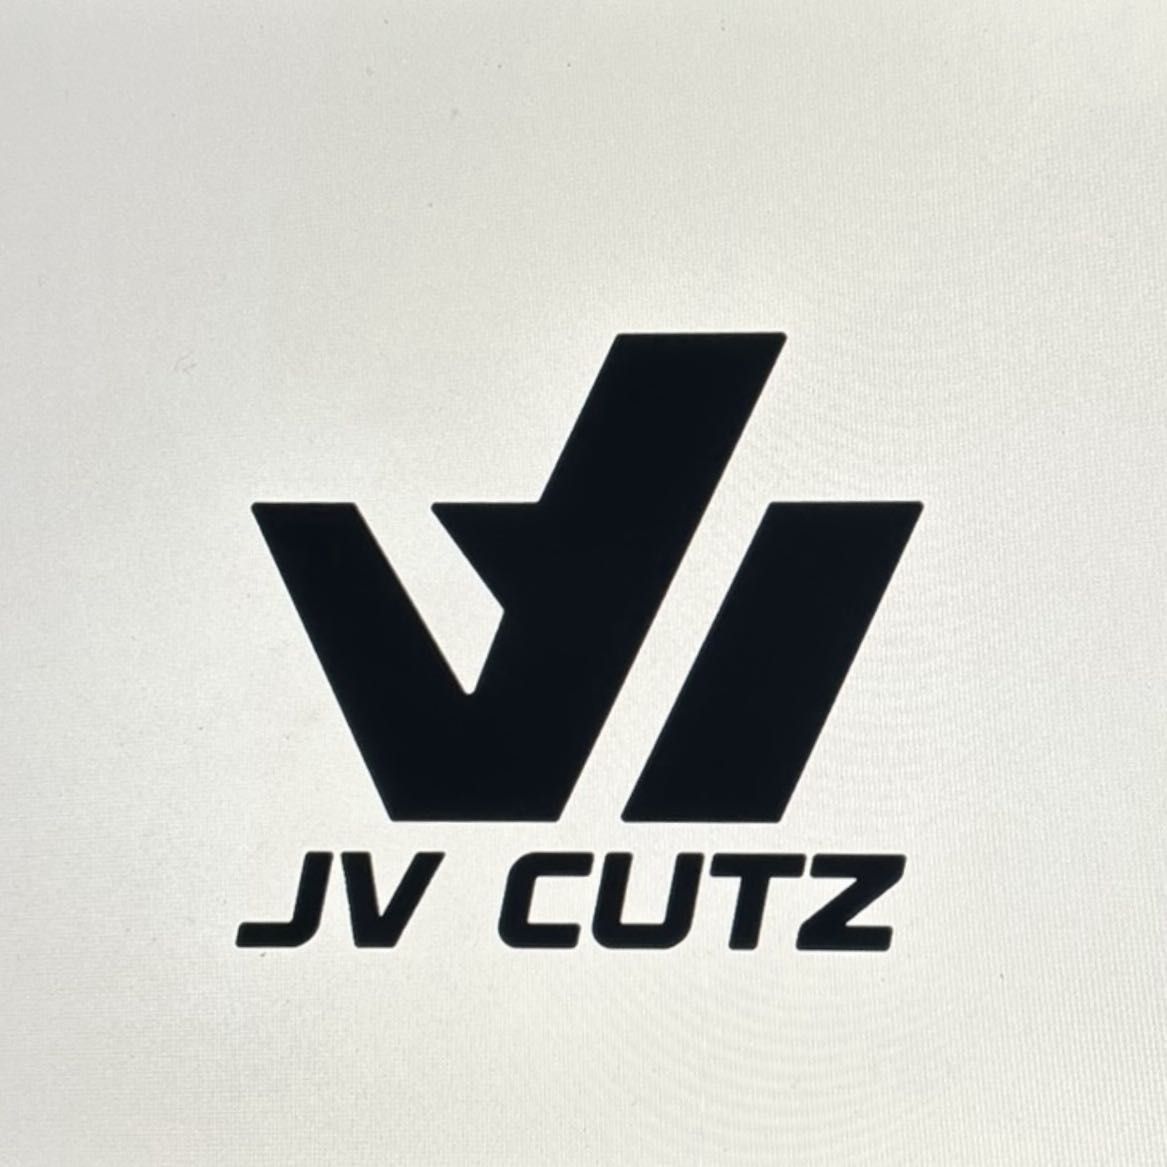 Jvcutz, 2500 Martin Luther King Pkwy, Des Moines, 50310